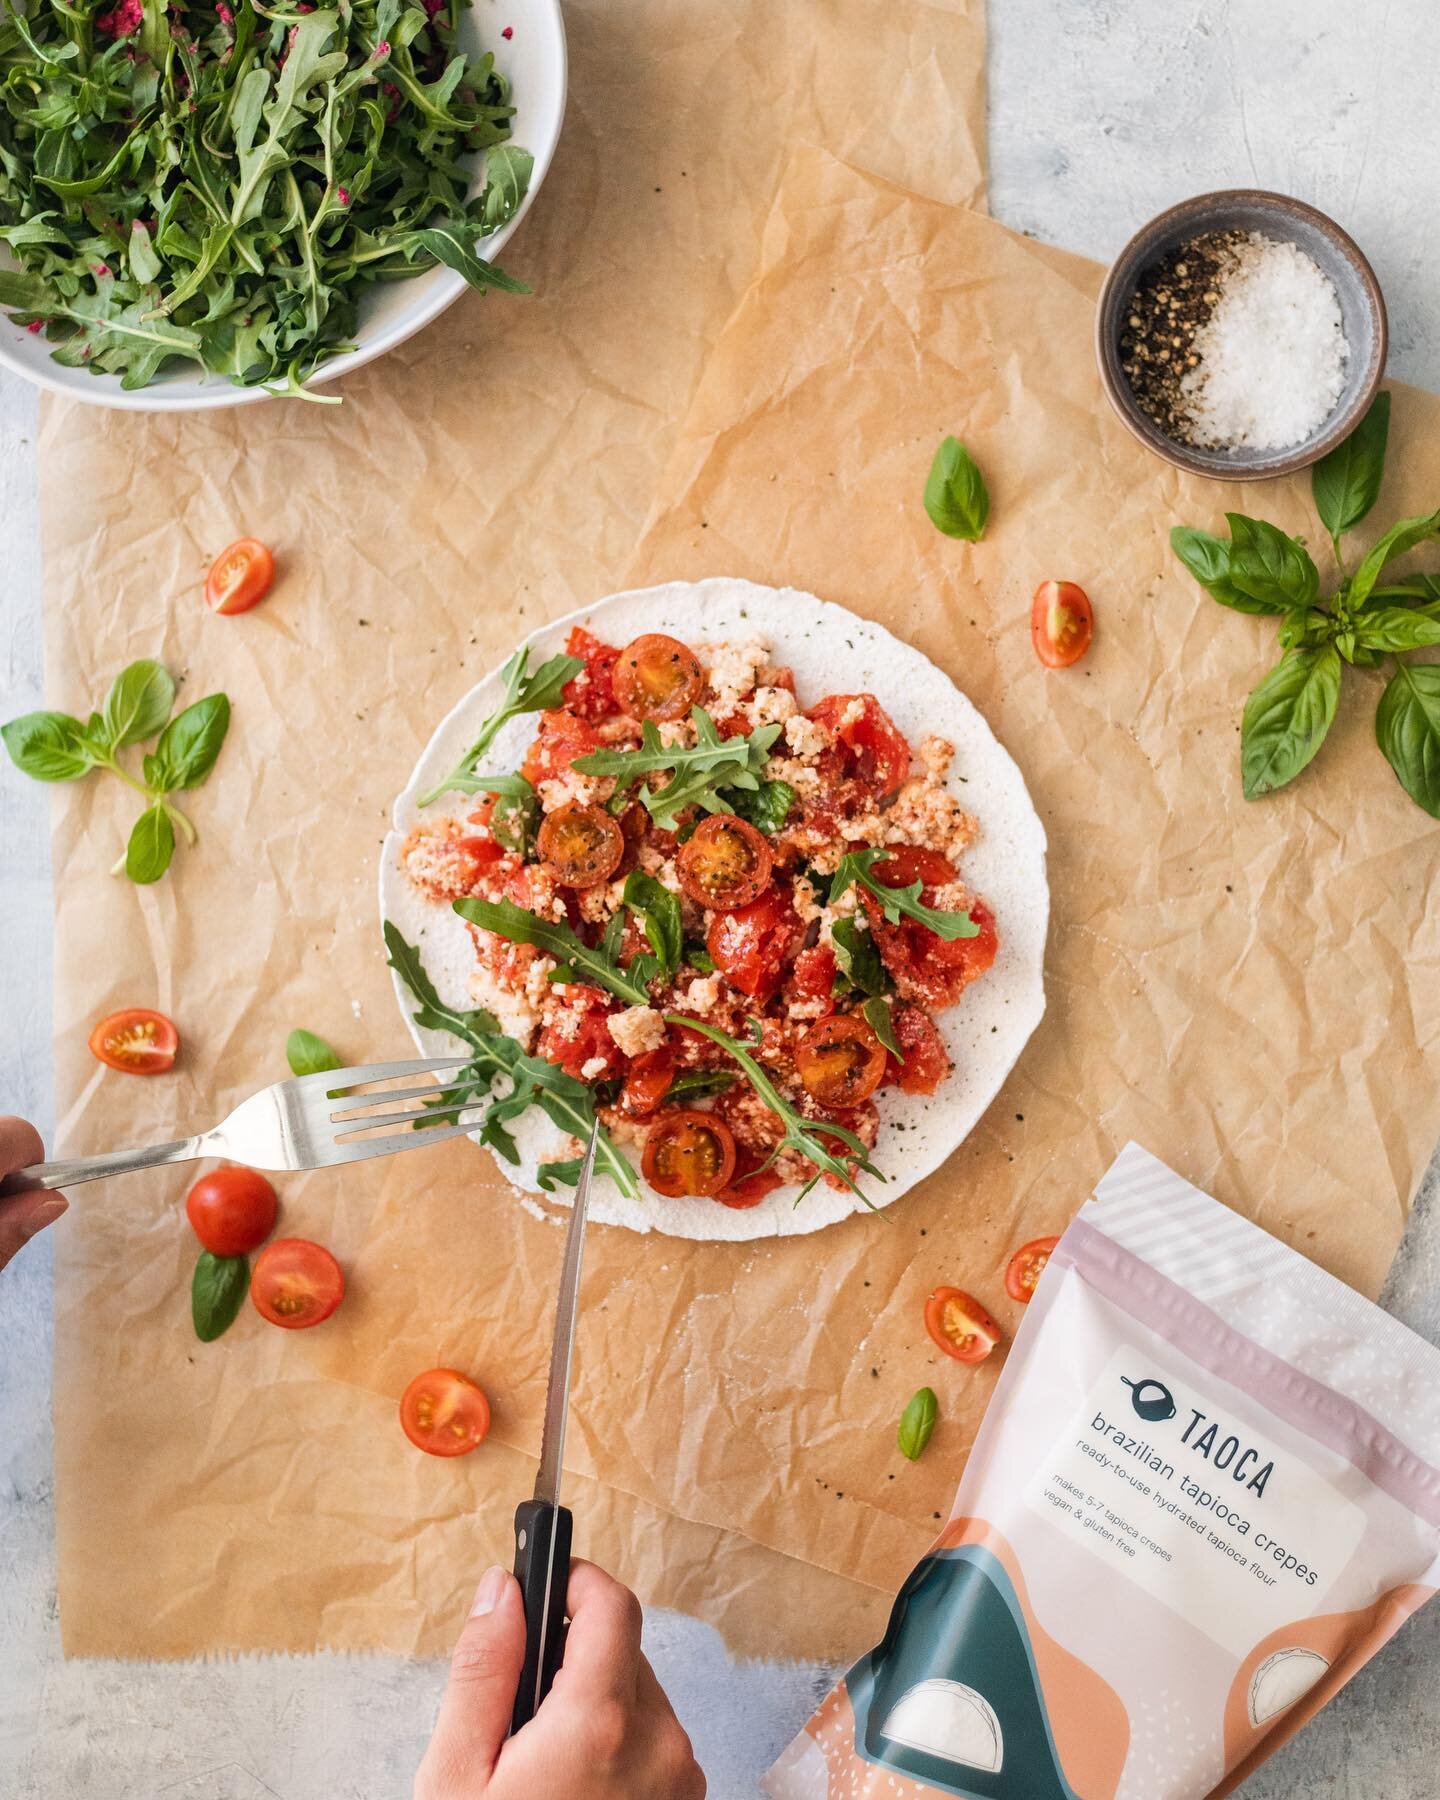 This gorgeous shot by @omumeshi 😍😍😍

Taoca with simple fillings that you might already have in the fridge: cheese, cherry tomato, rocket, basil, olive oil and black pepper. A light but filling meal 🤤

#glutenfreesydney #glutenfreeaustralia #glute